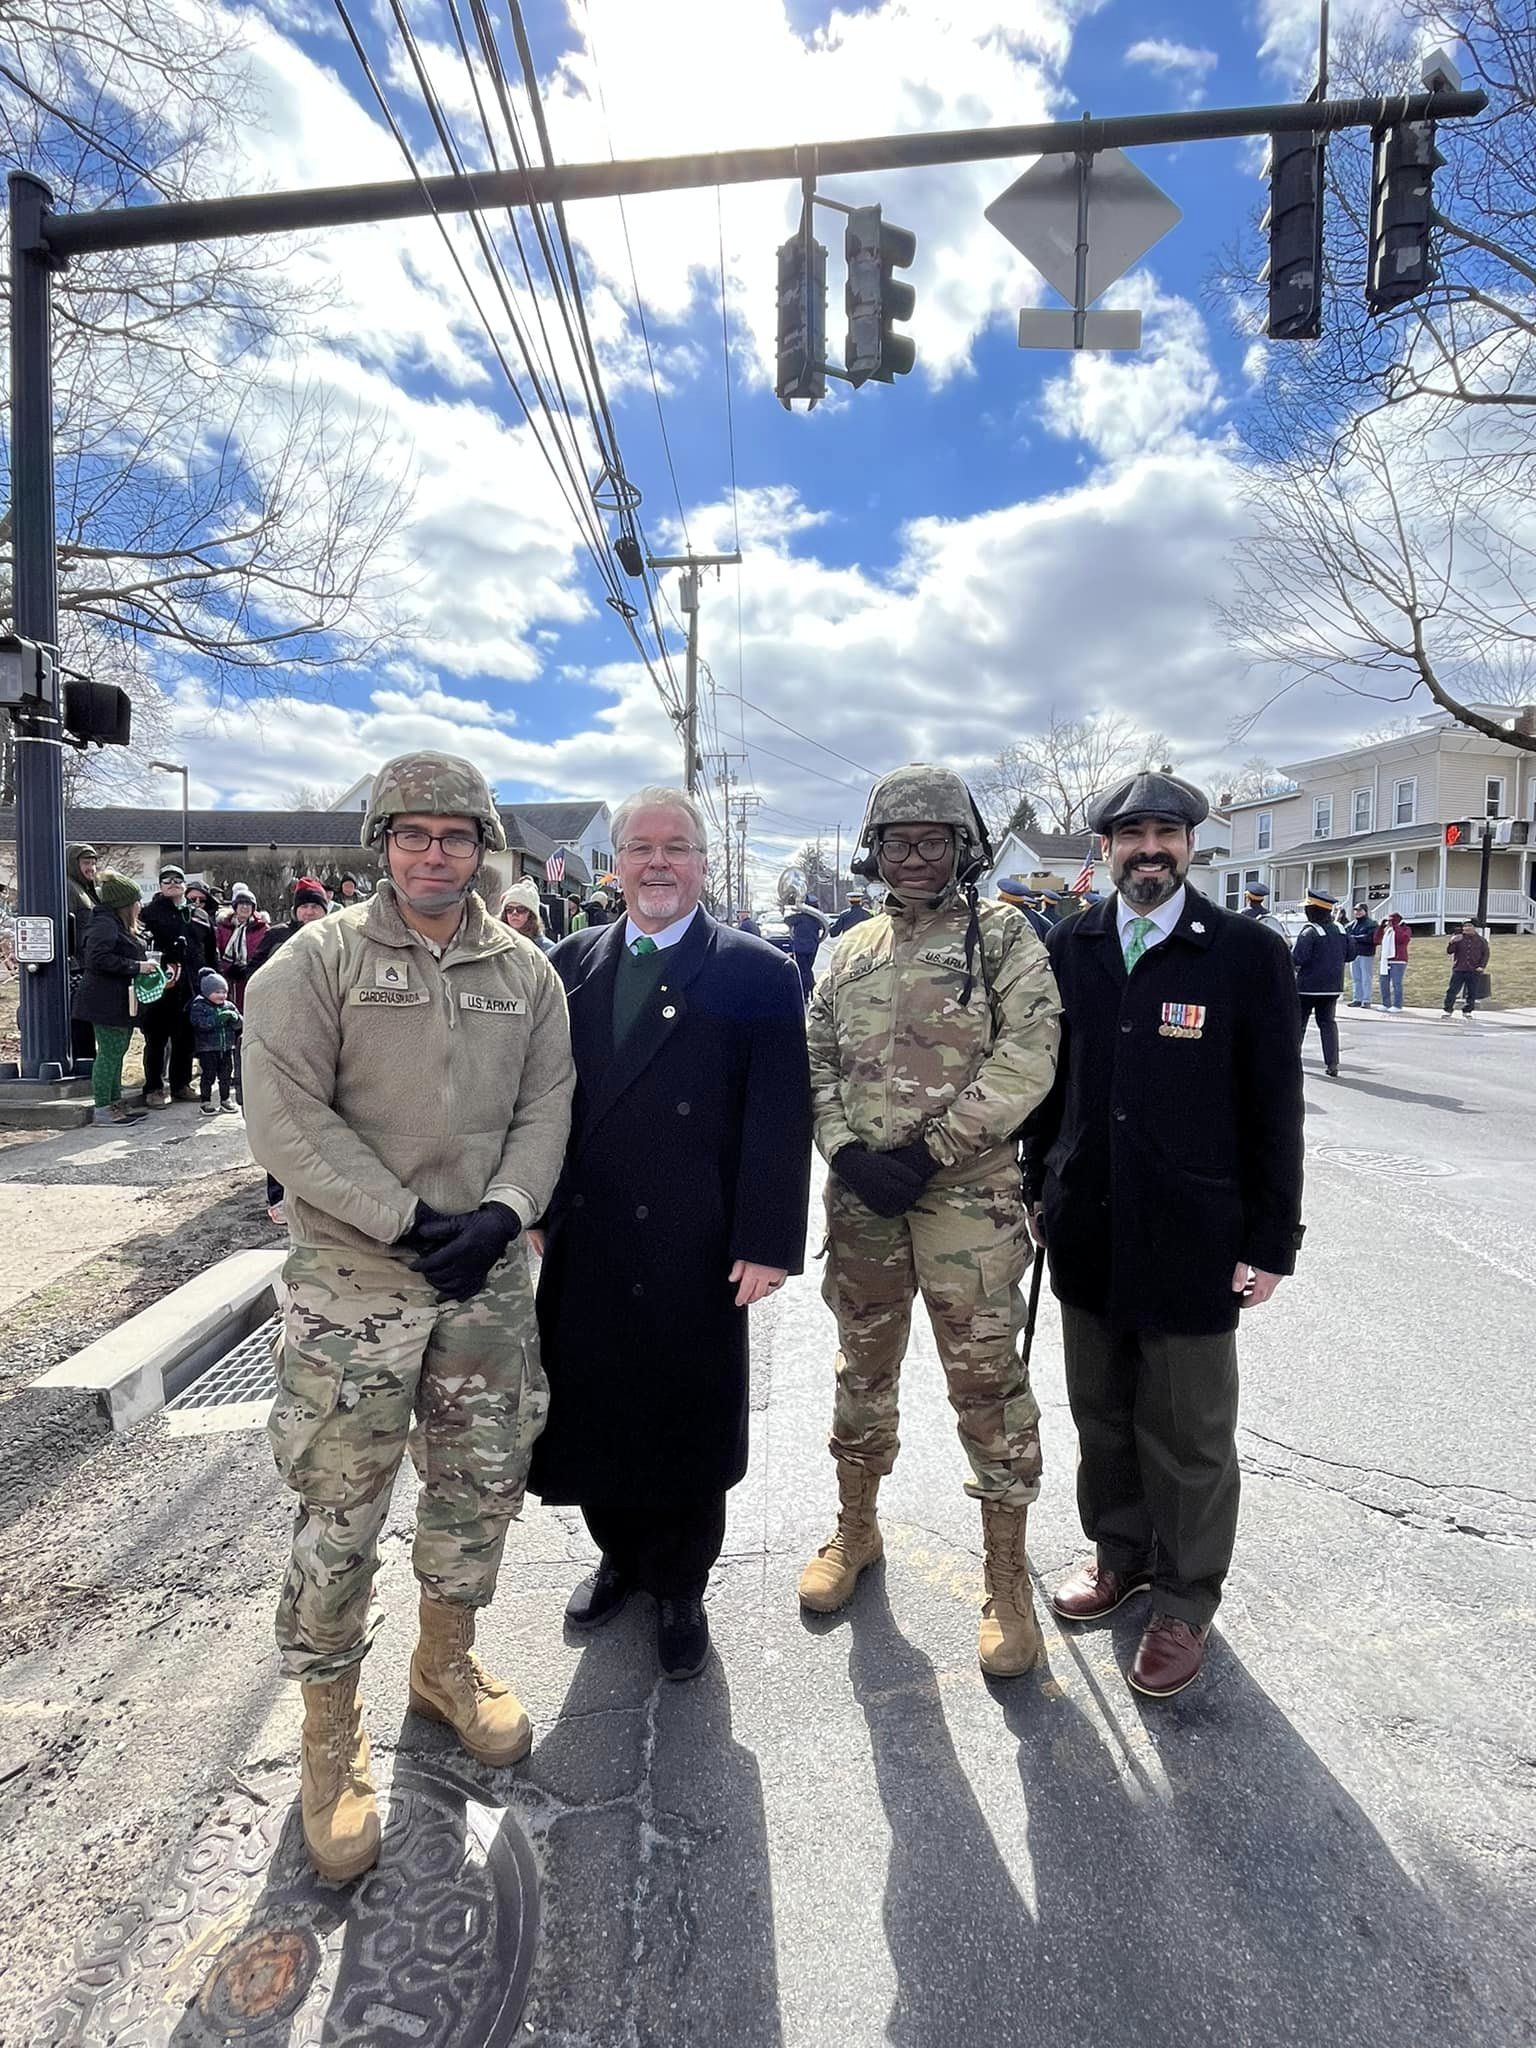 Mayor Dean Esposito with military service members